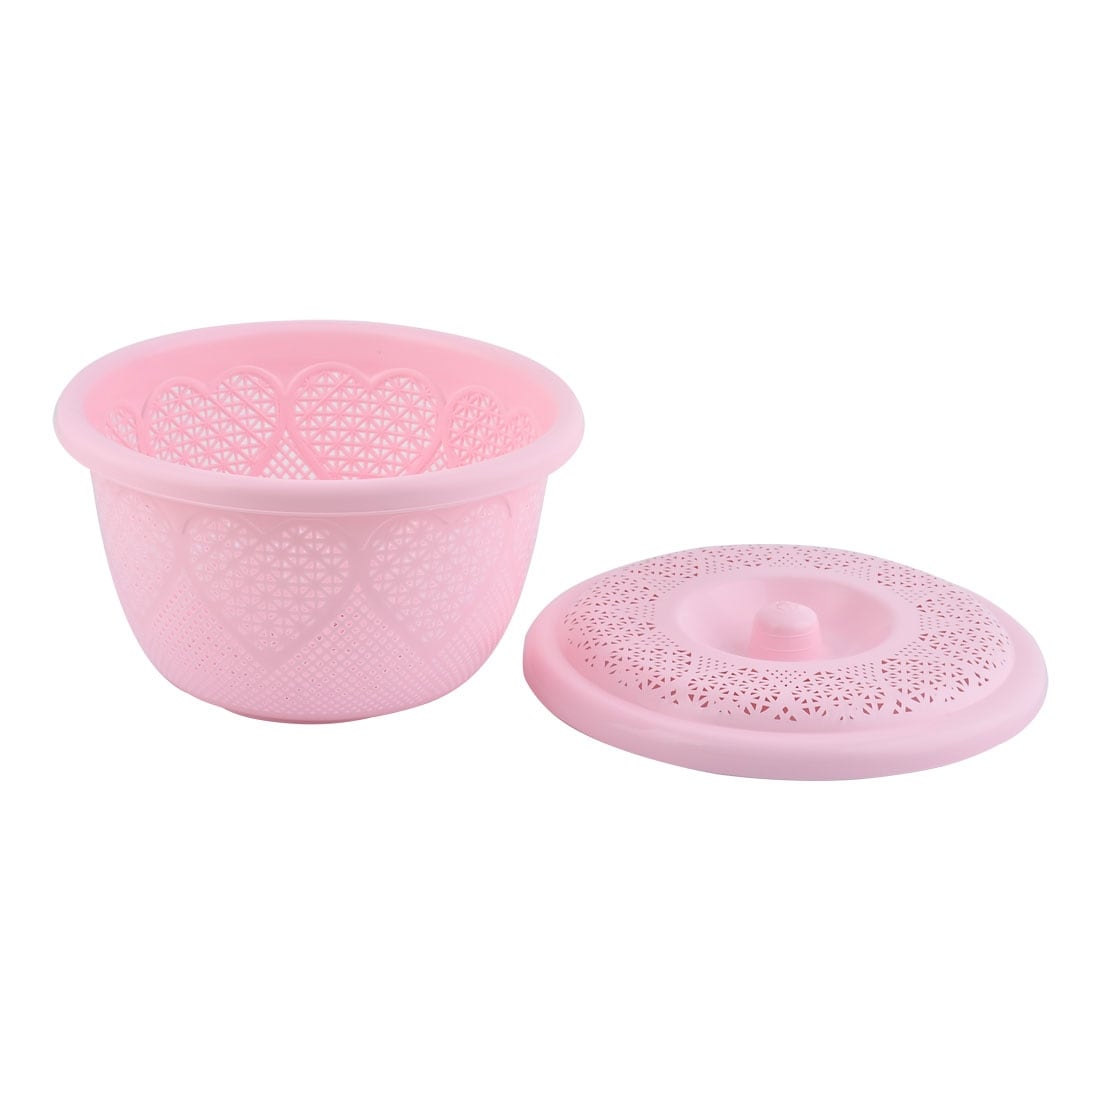 https://ak1.ostkcdn.com/images/products/is/images/direct/e86758cc5145d7b53abdc5e879d3fa6aa2df38b6/Home-Plastic-Fruit-Vegetable-Washing-Colander-Strainer-Basket-Container-Pink.jpg